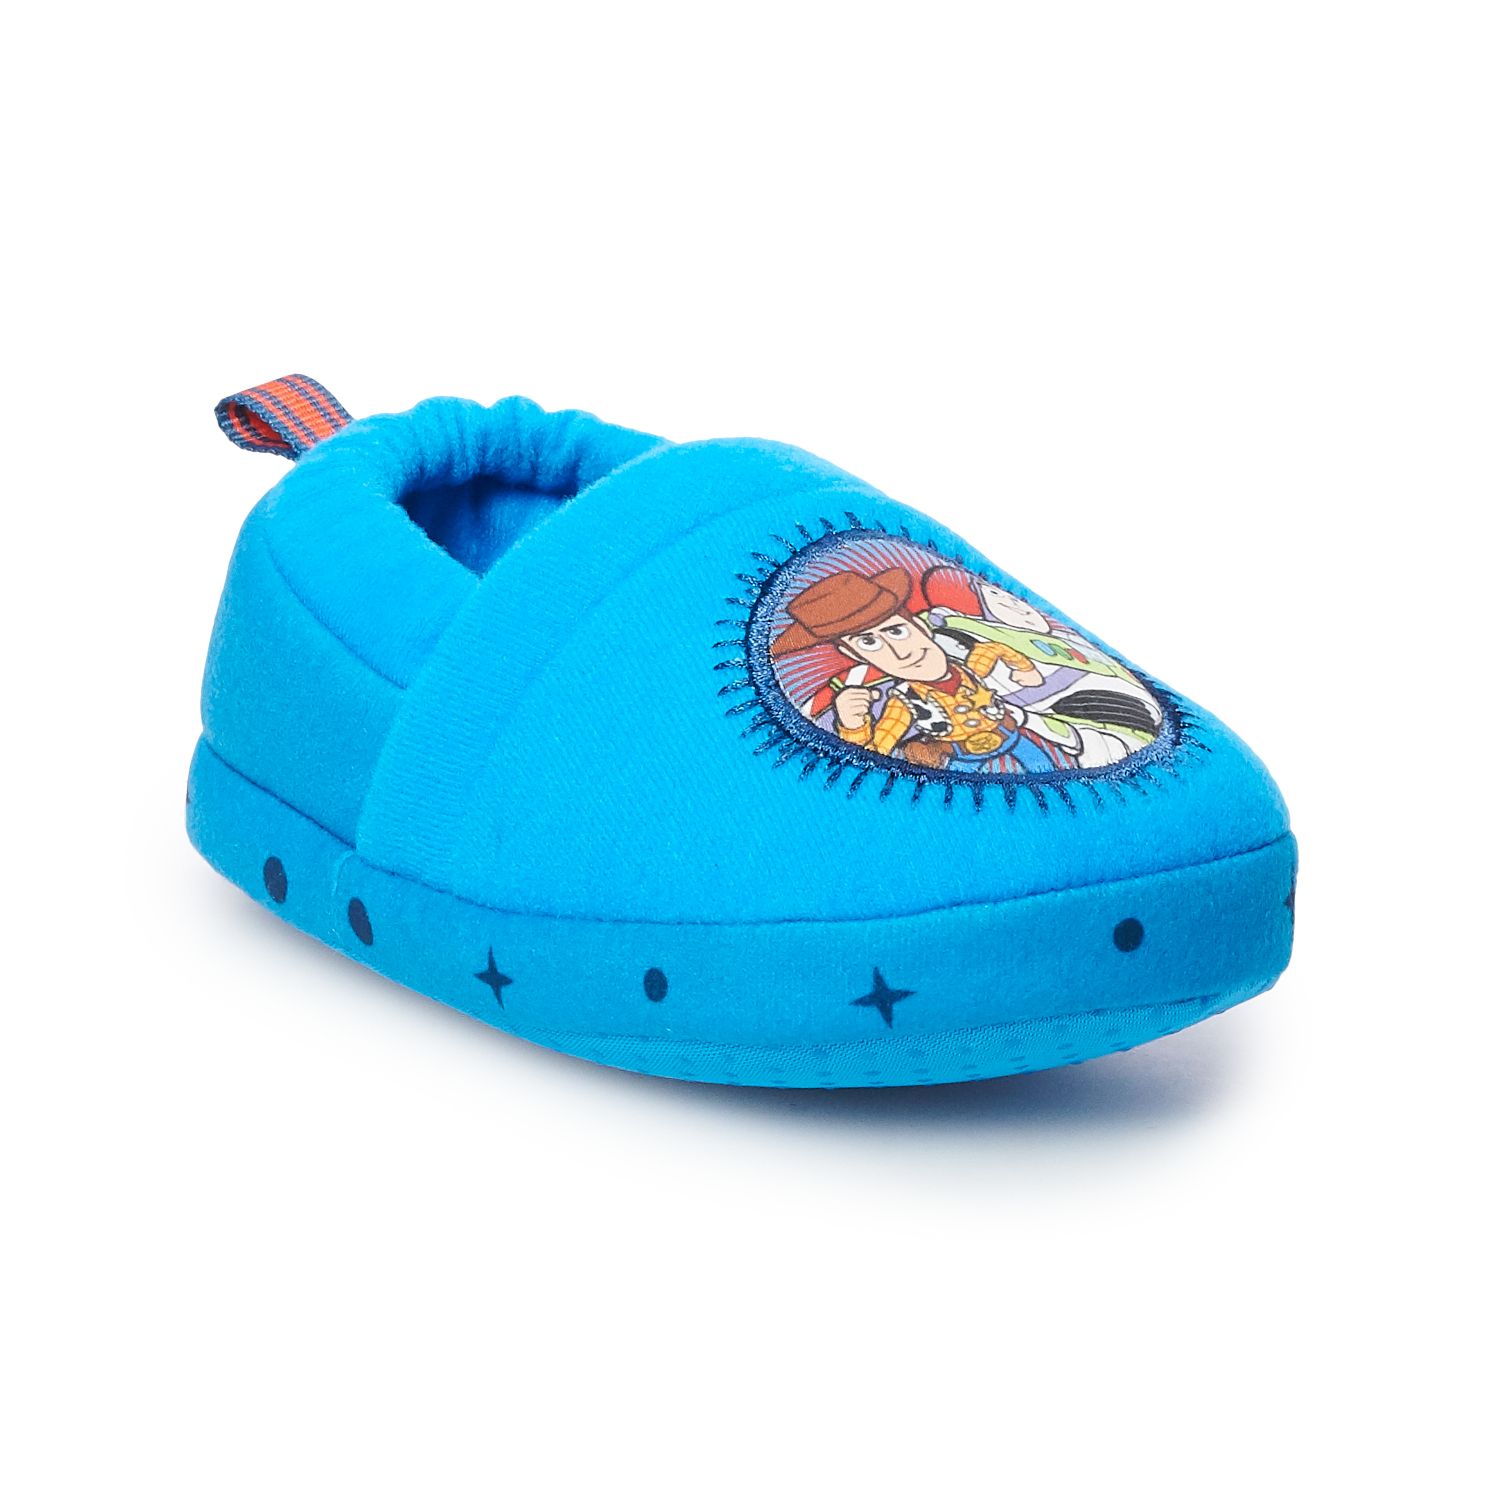 buzz lightyear slippers toddlers